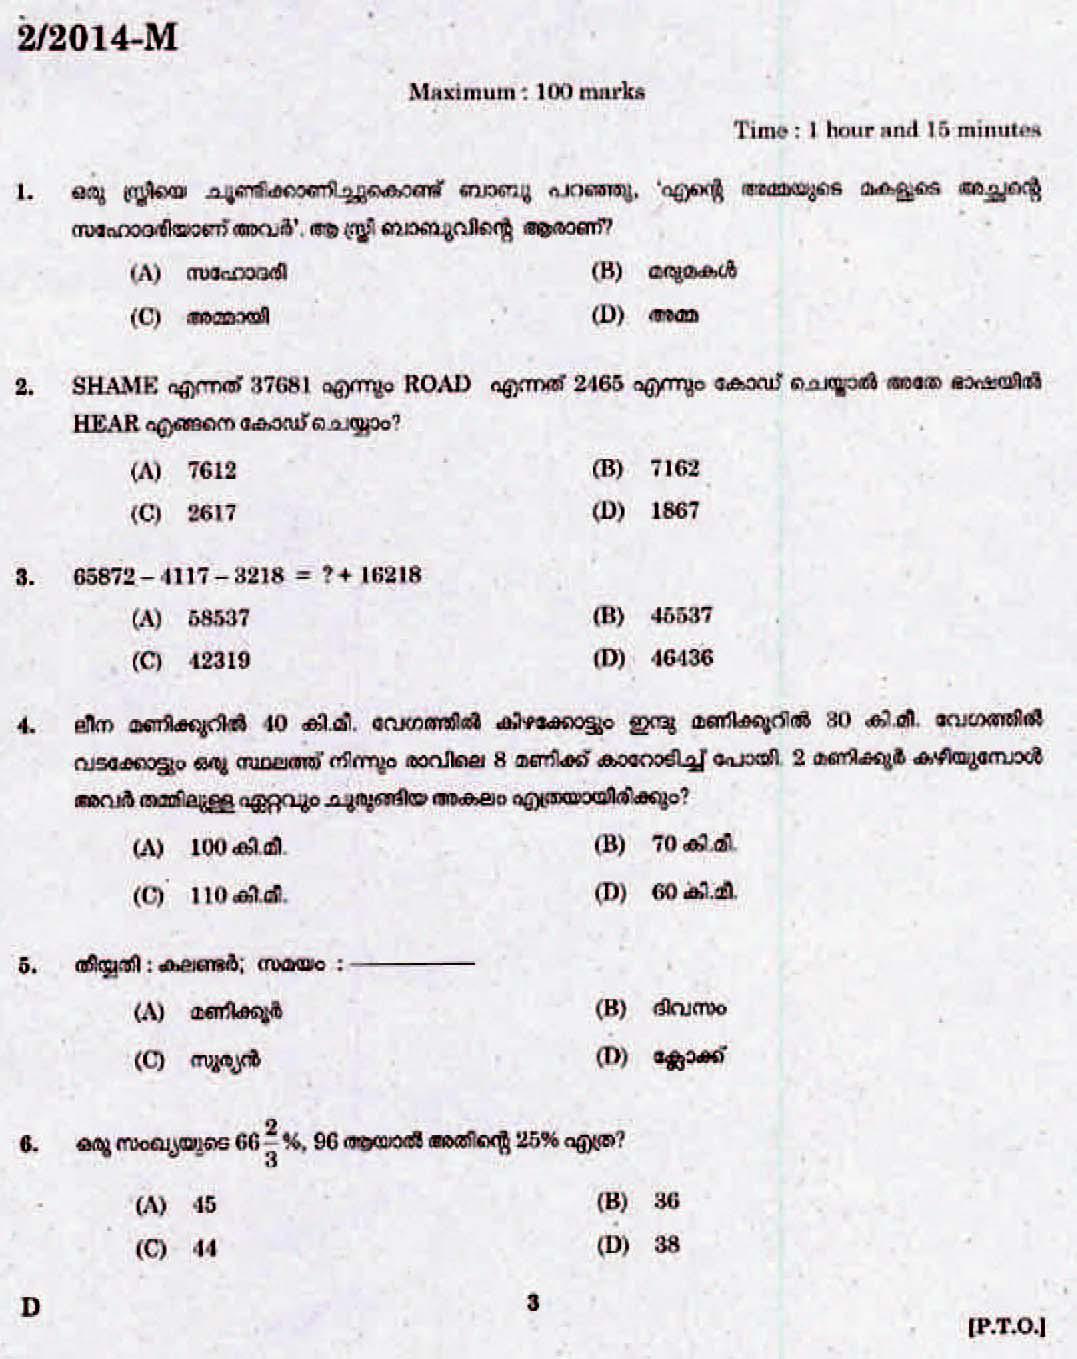 LD Clerk Question Paper Malayalam 2014 Paper Code 022014 M 0